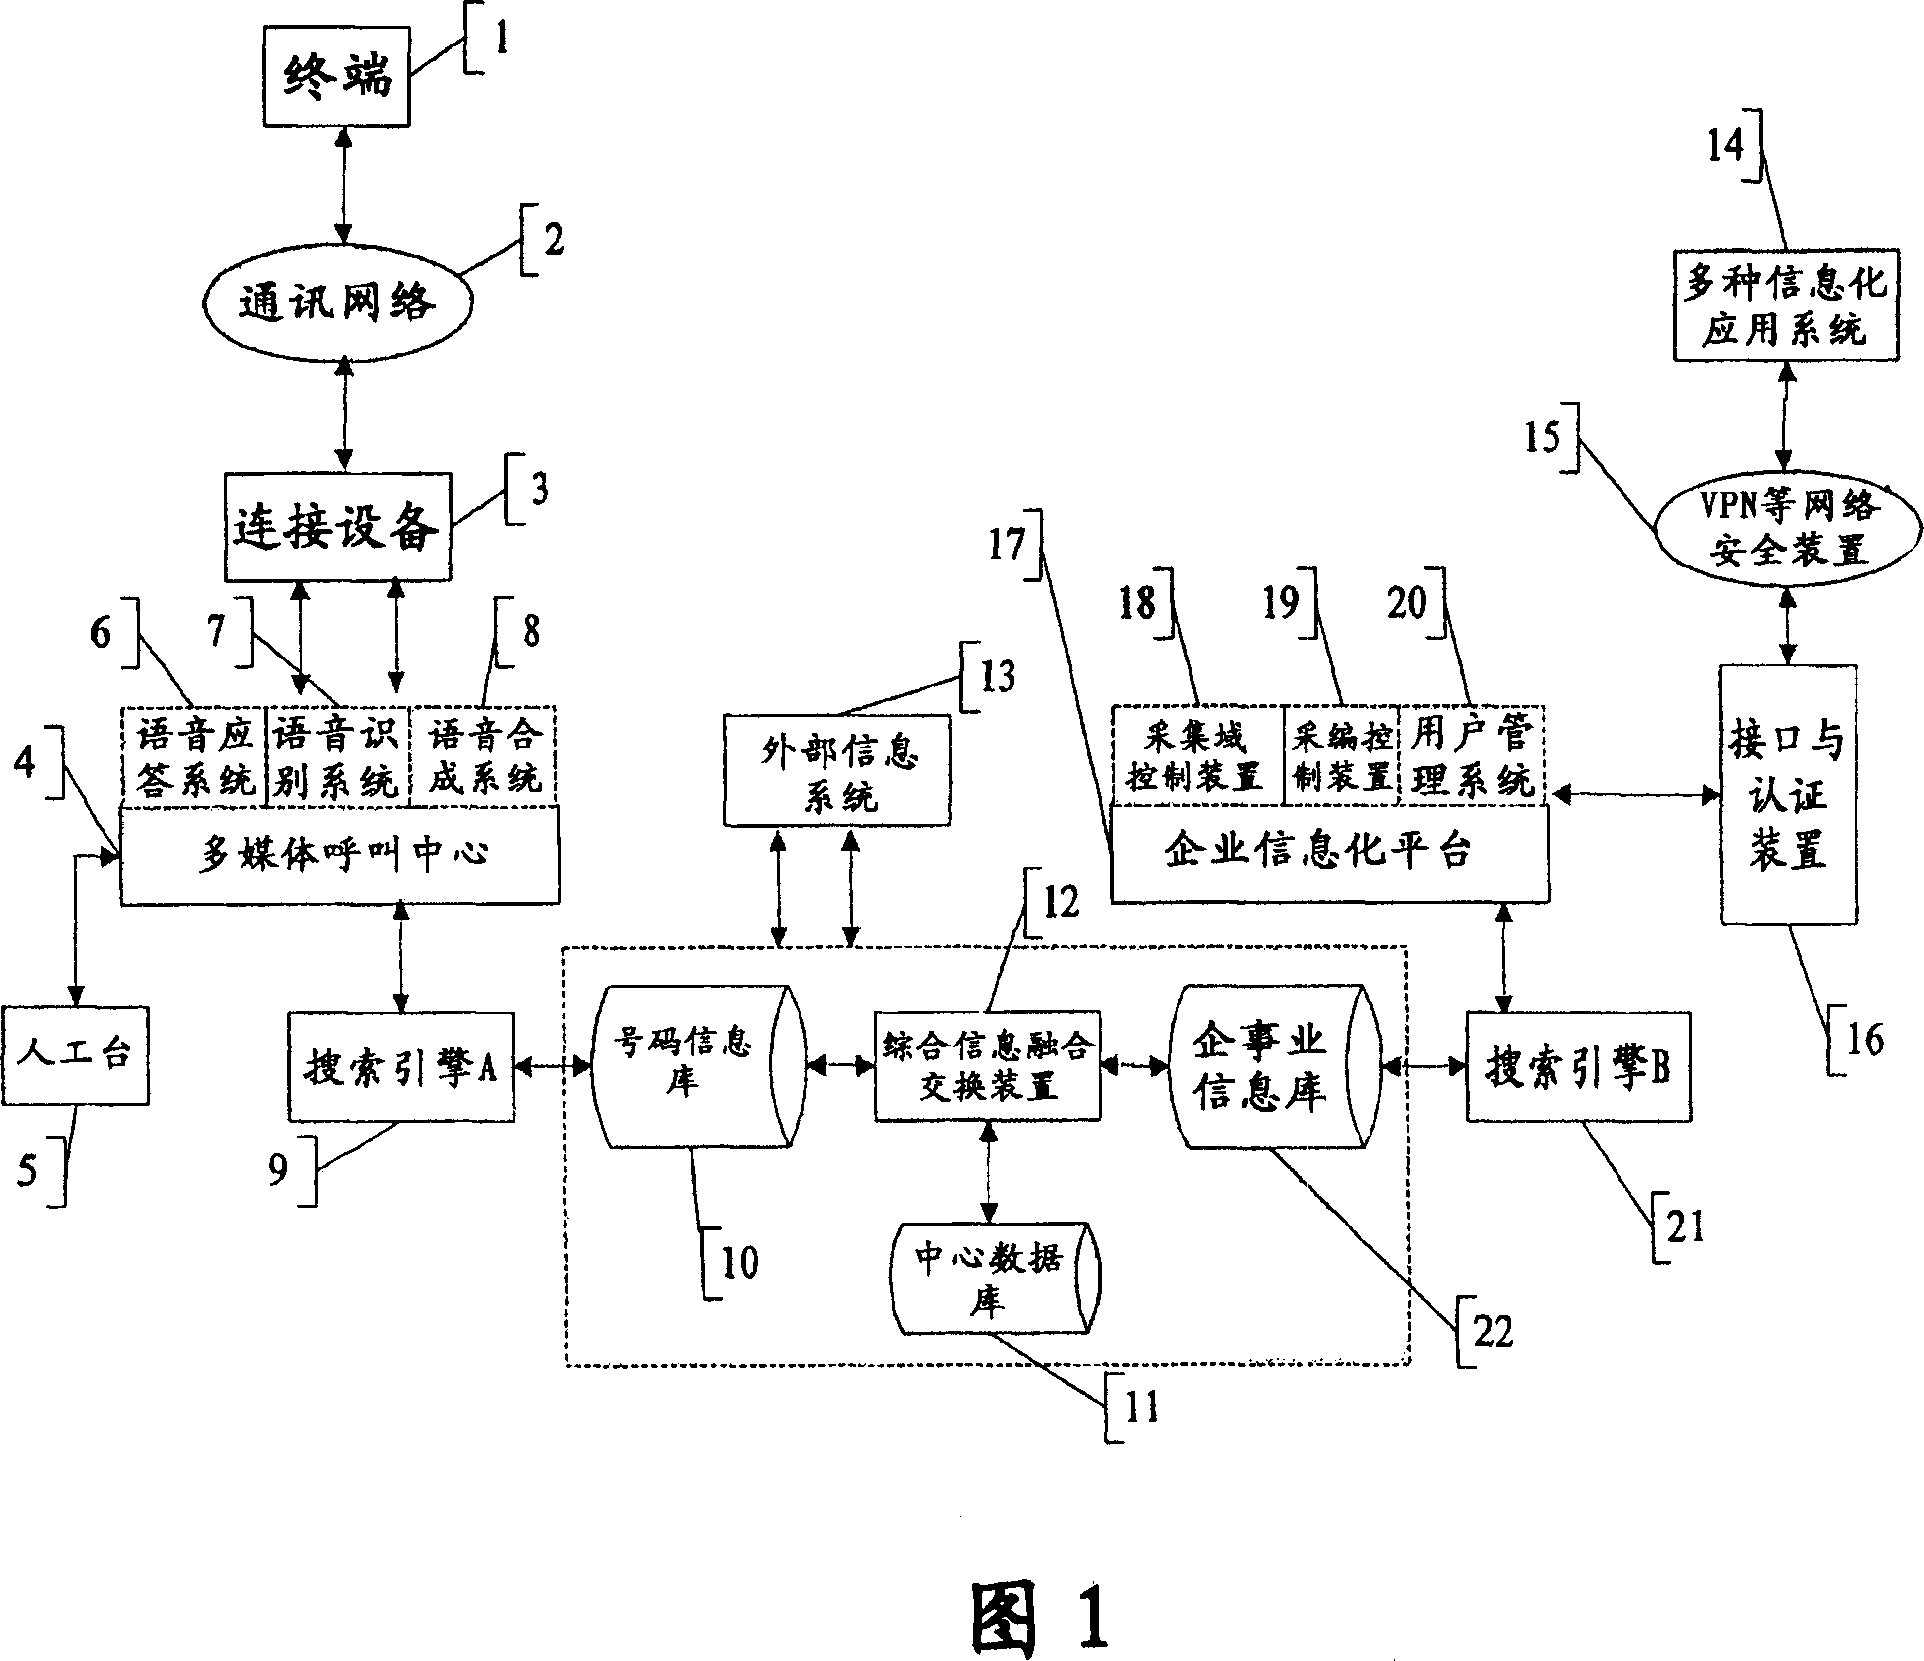 Telecom integrated information system and method